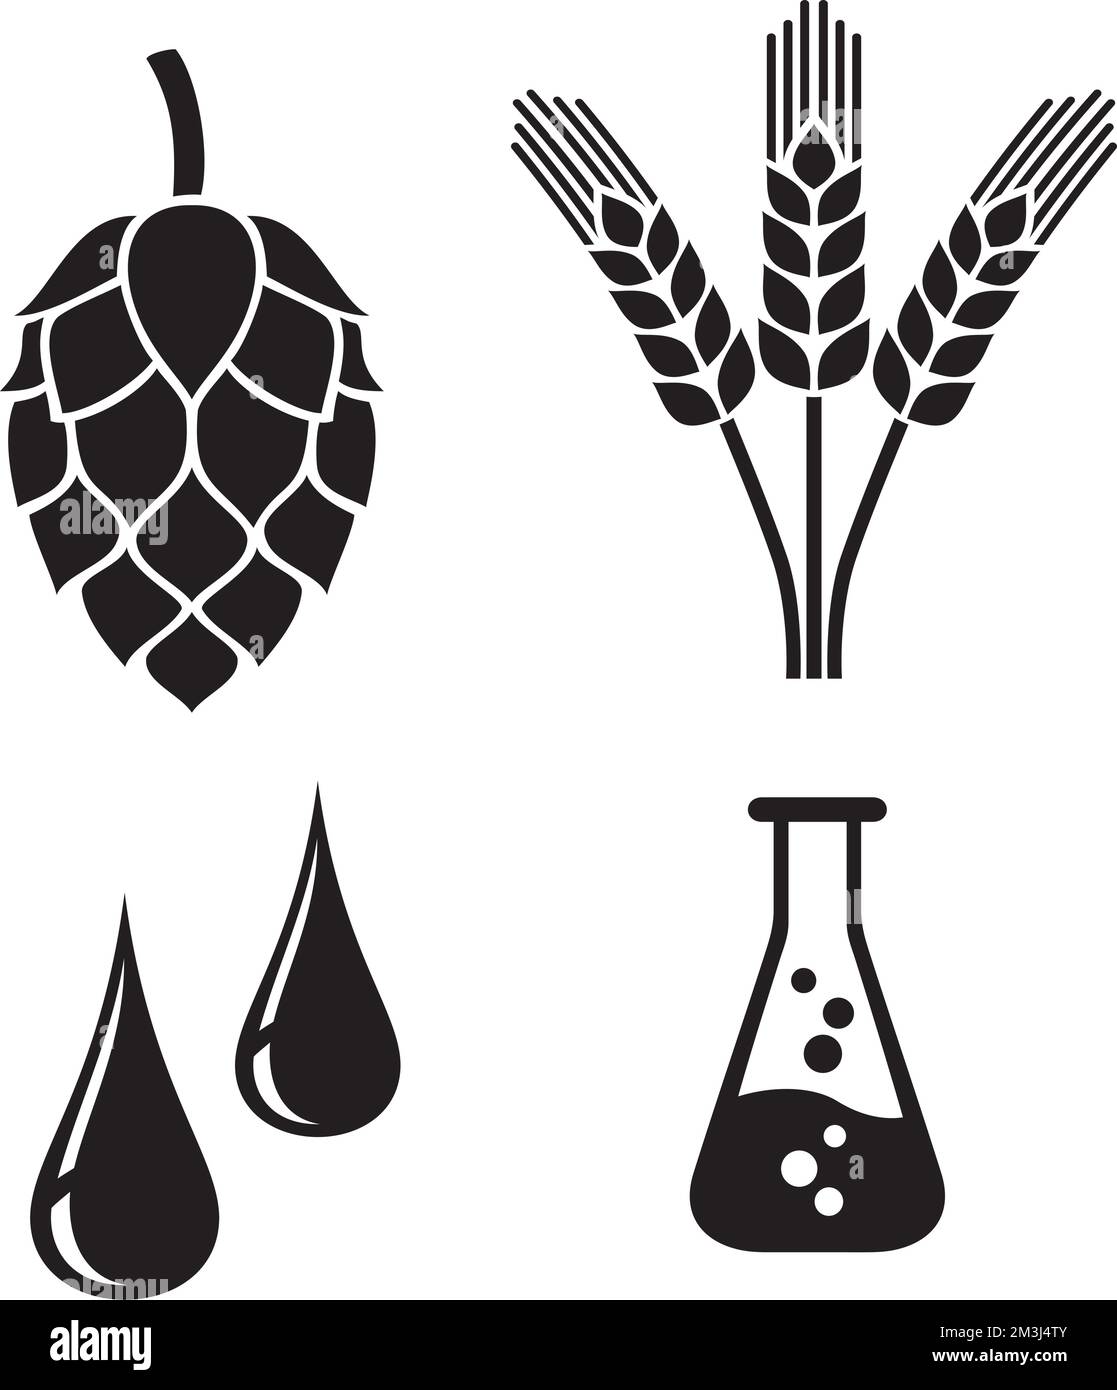 Brewing Ingredients Icons. Hops, Barley,  Water. Black and White. Vector Illustration. Stock Vector